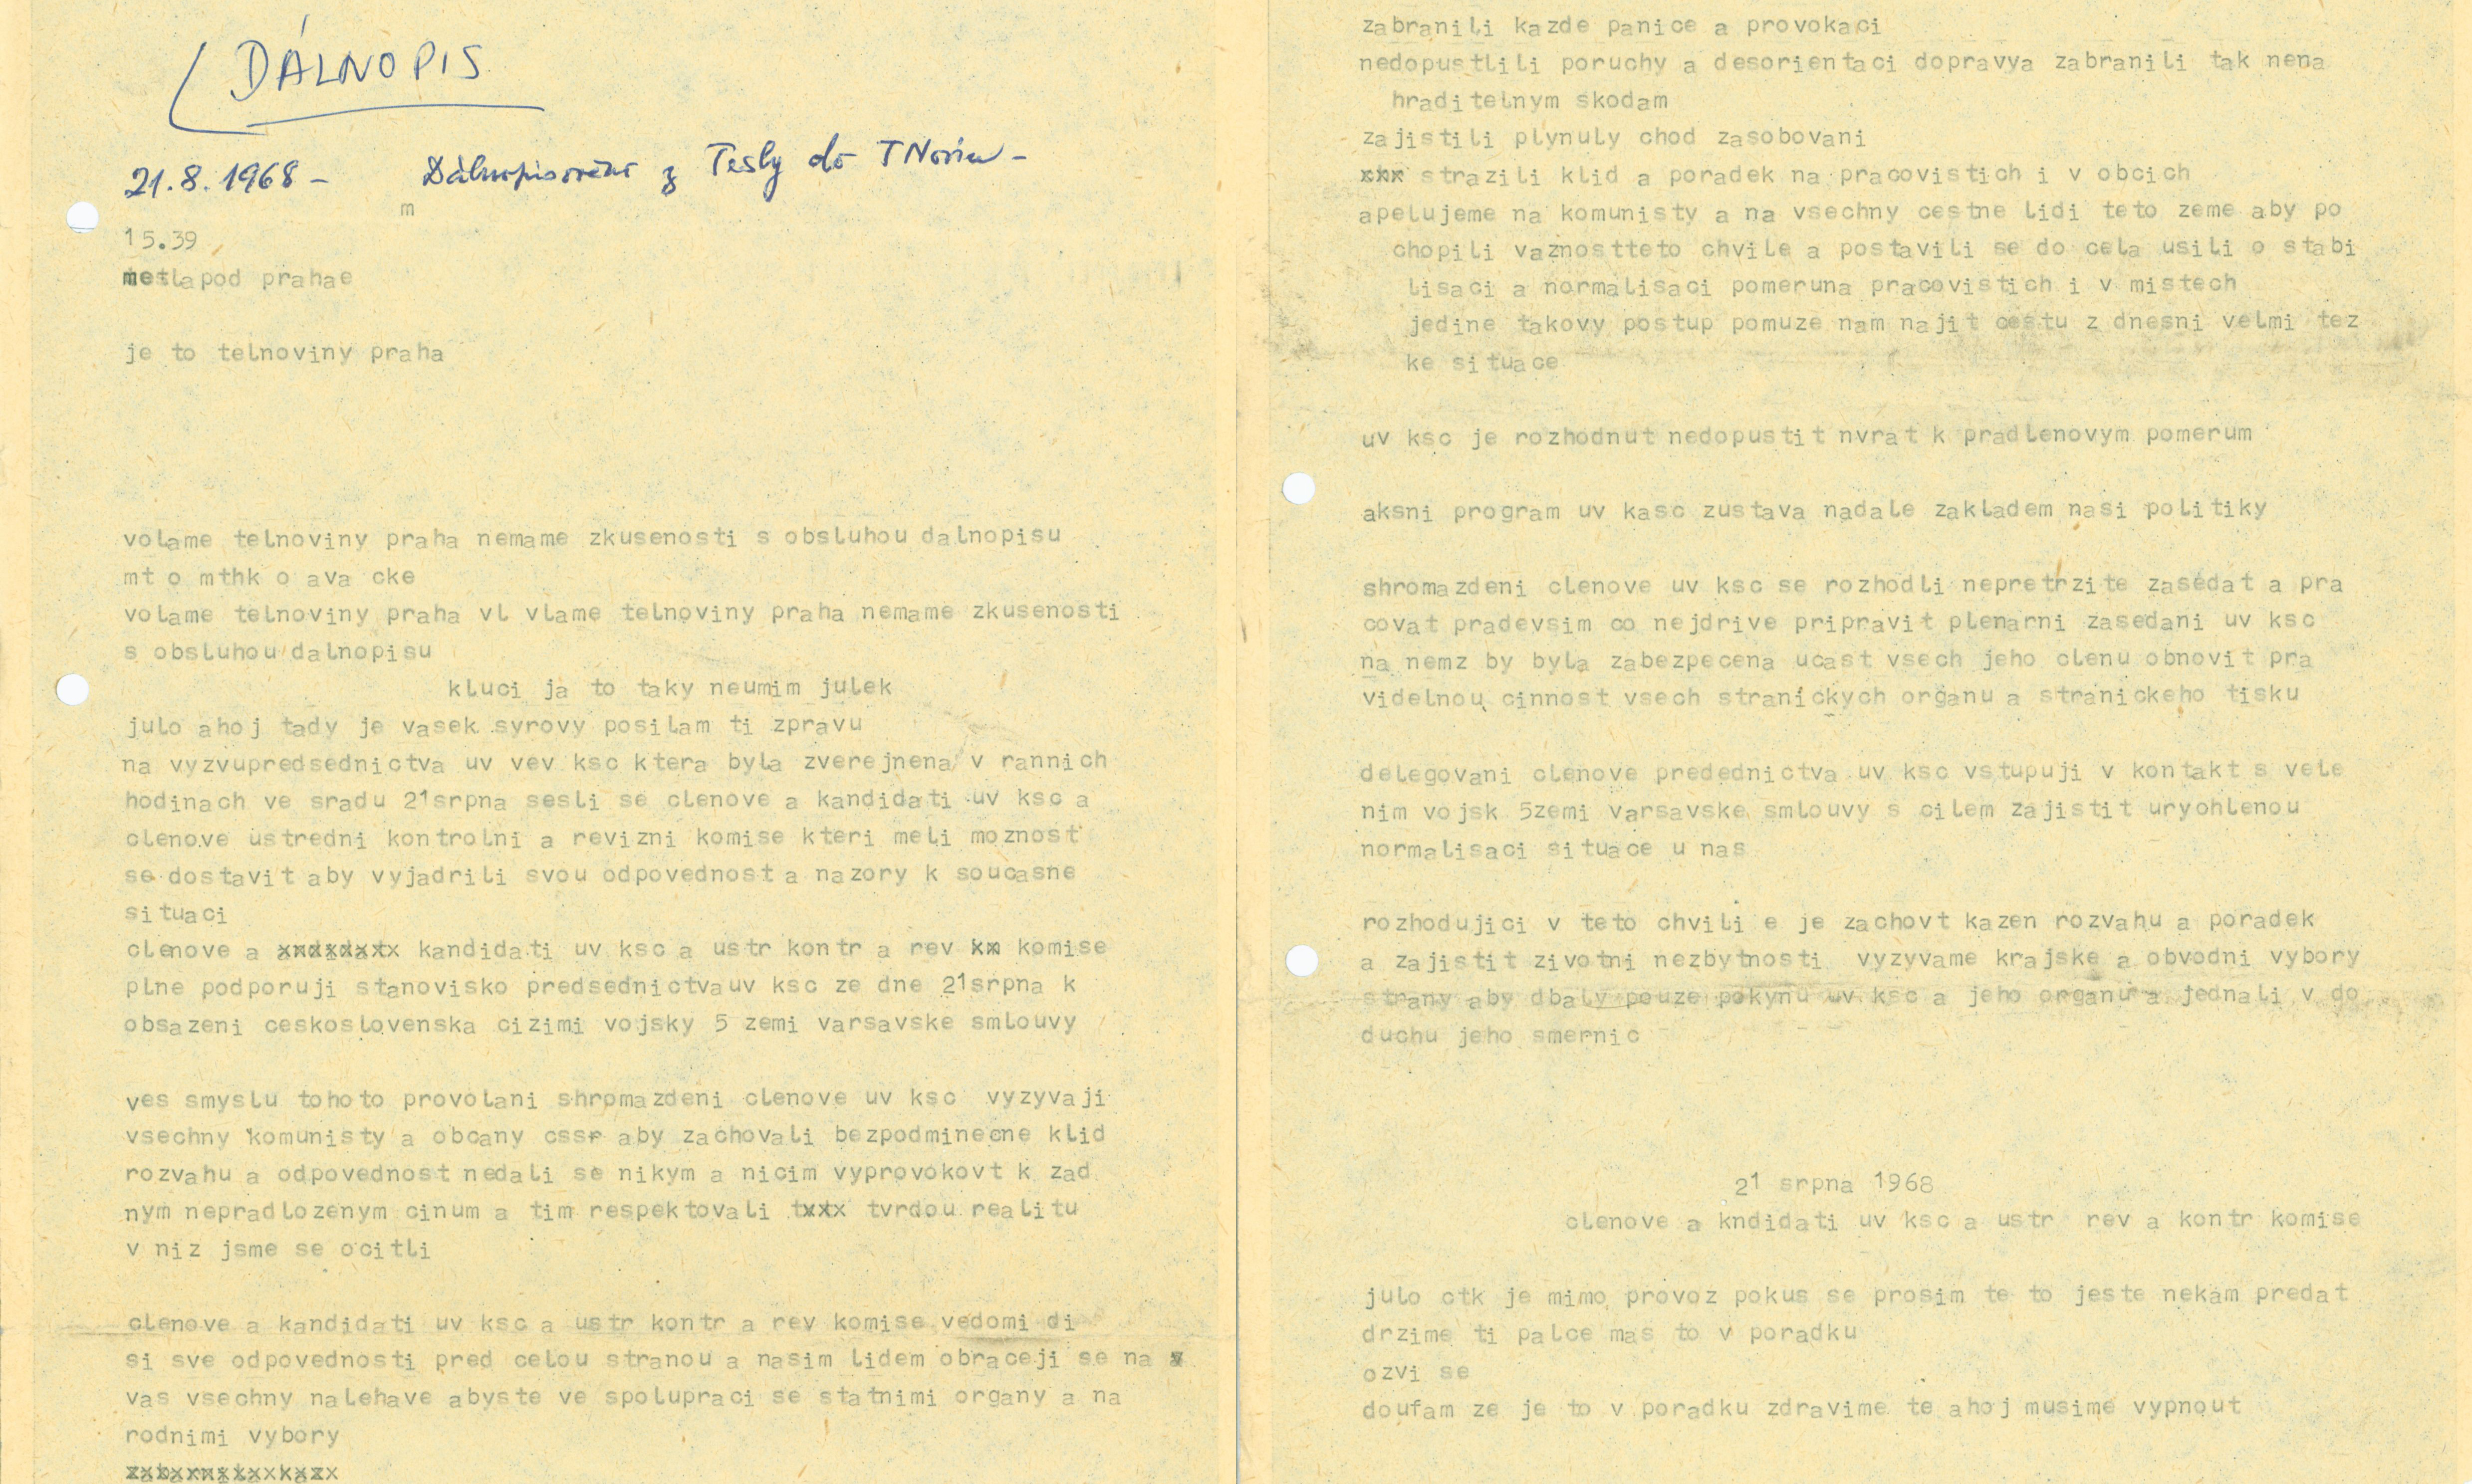 Telex Disseminating News About the Events of August 21, 1968, upon the Request of the Leadership of the Communist Party